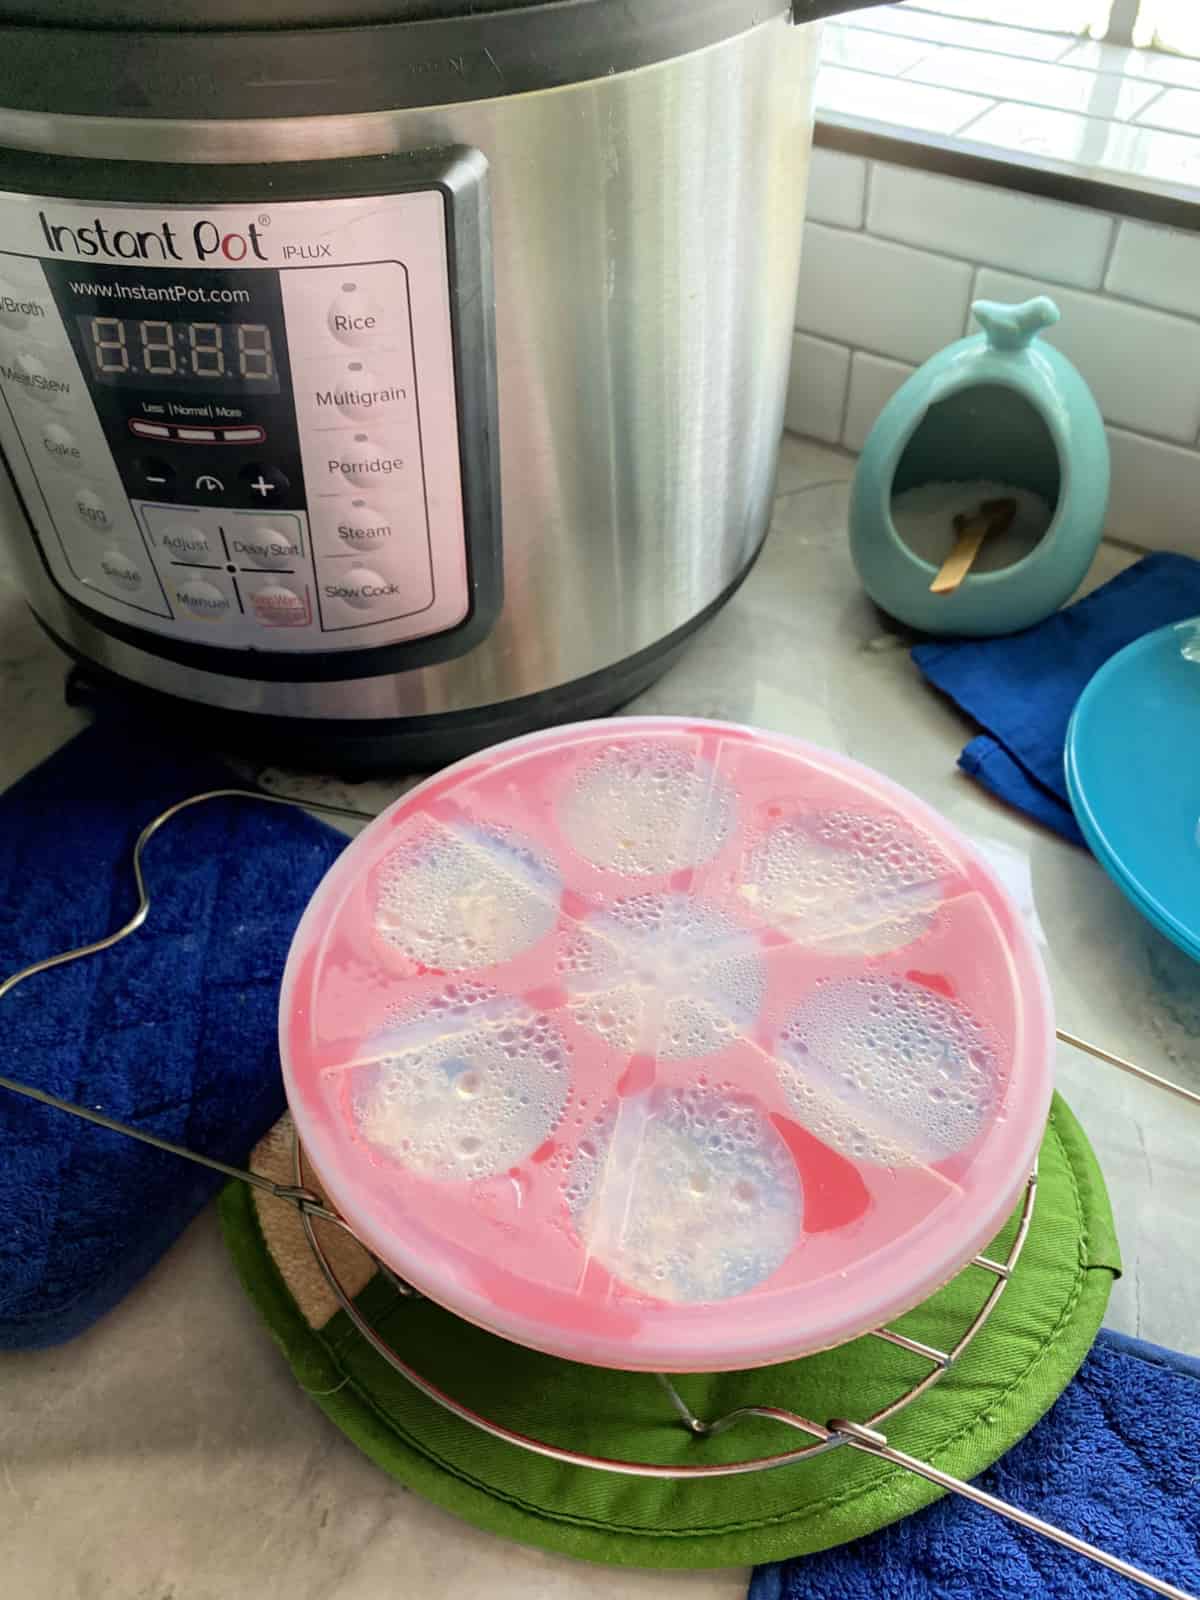 Egg mould on a wire rack with Instant Pot in background.